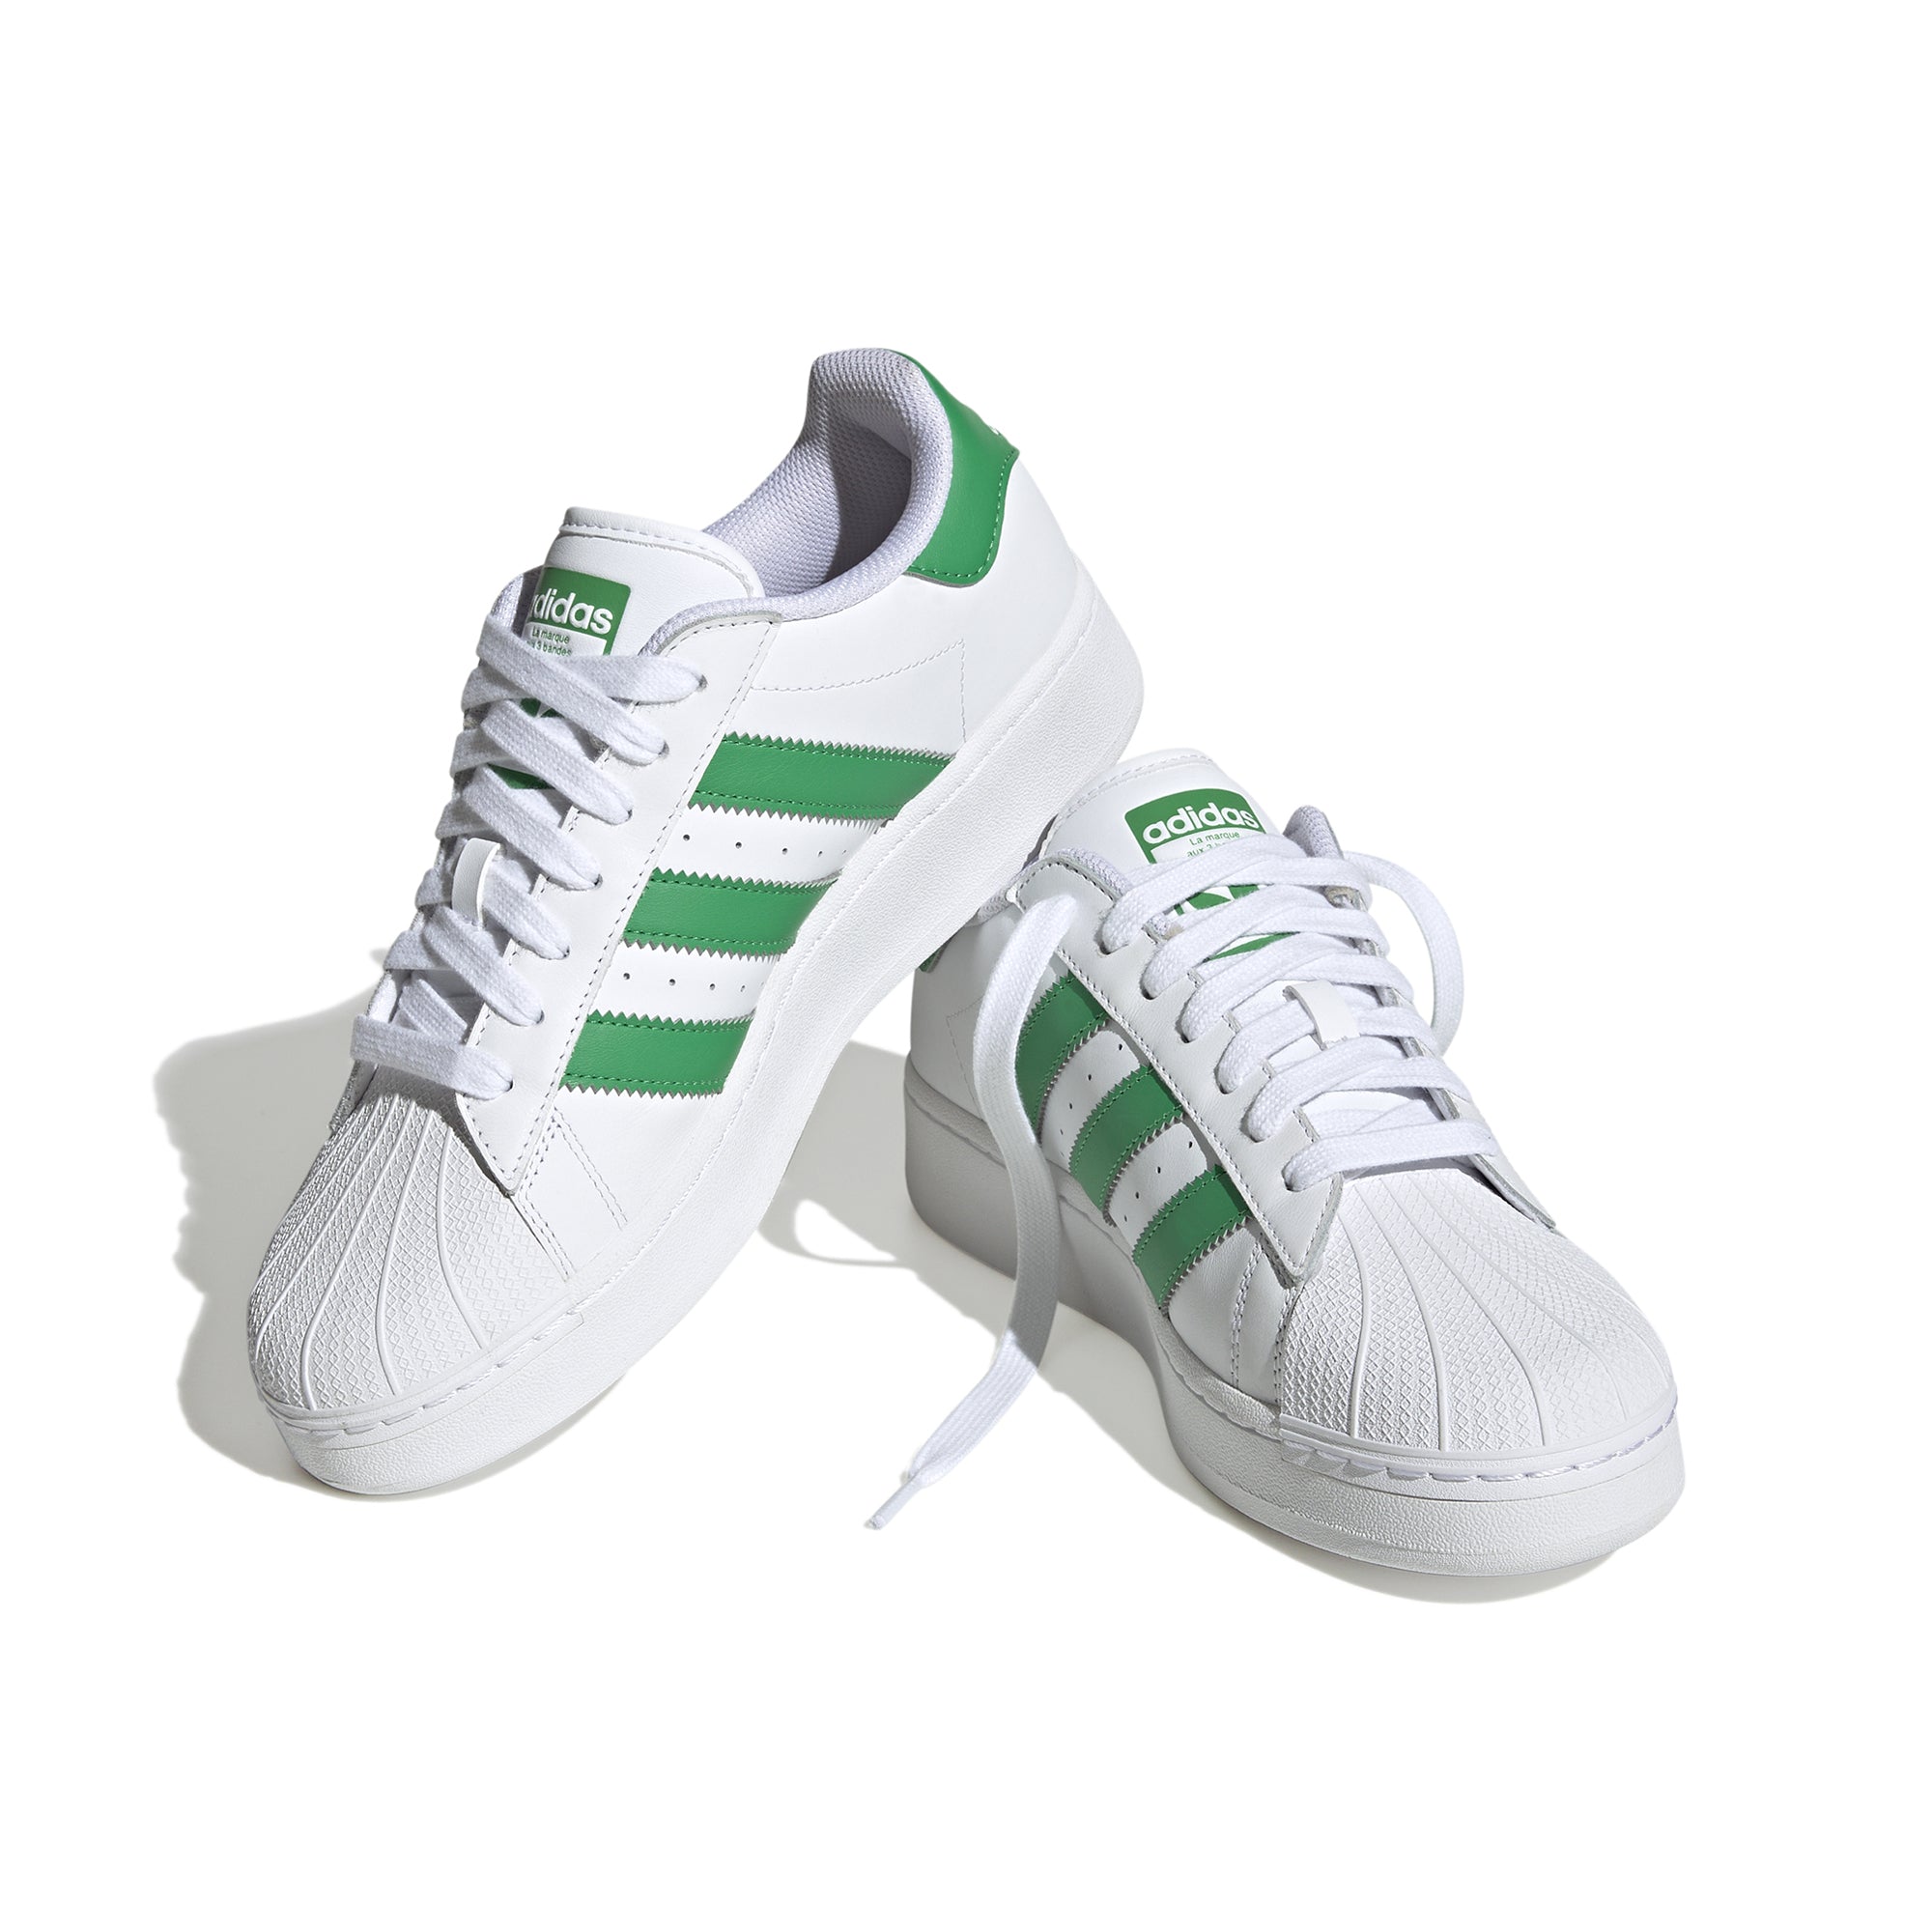 Superstar XLG Shoes IF8069